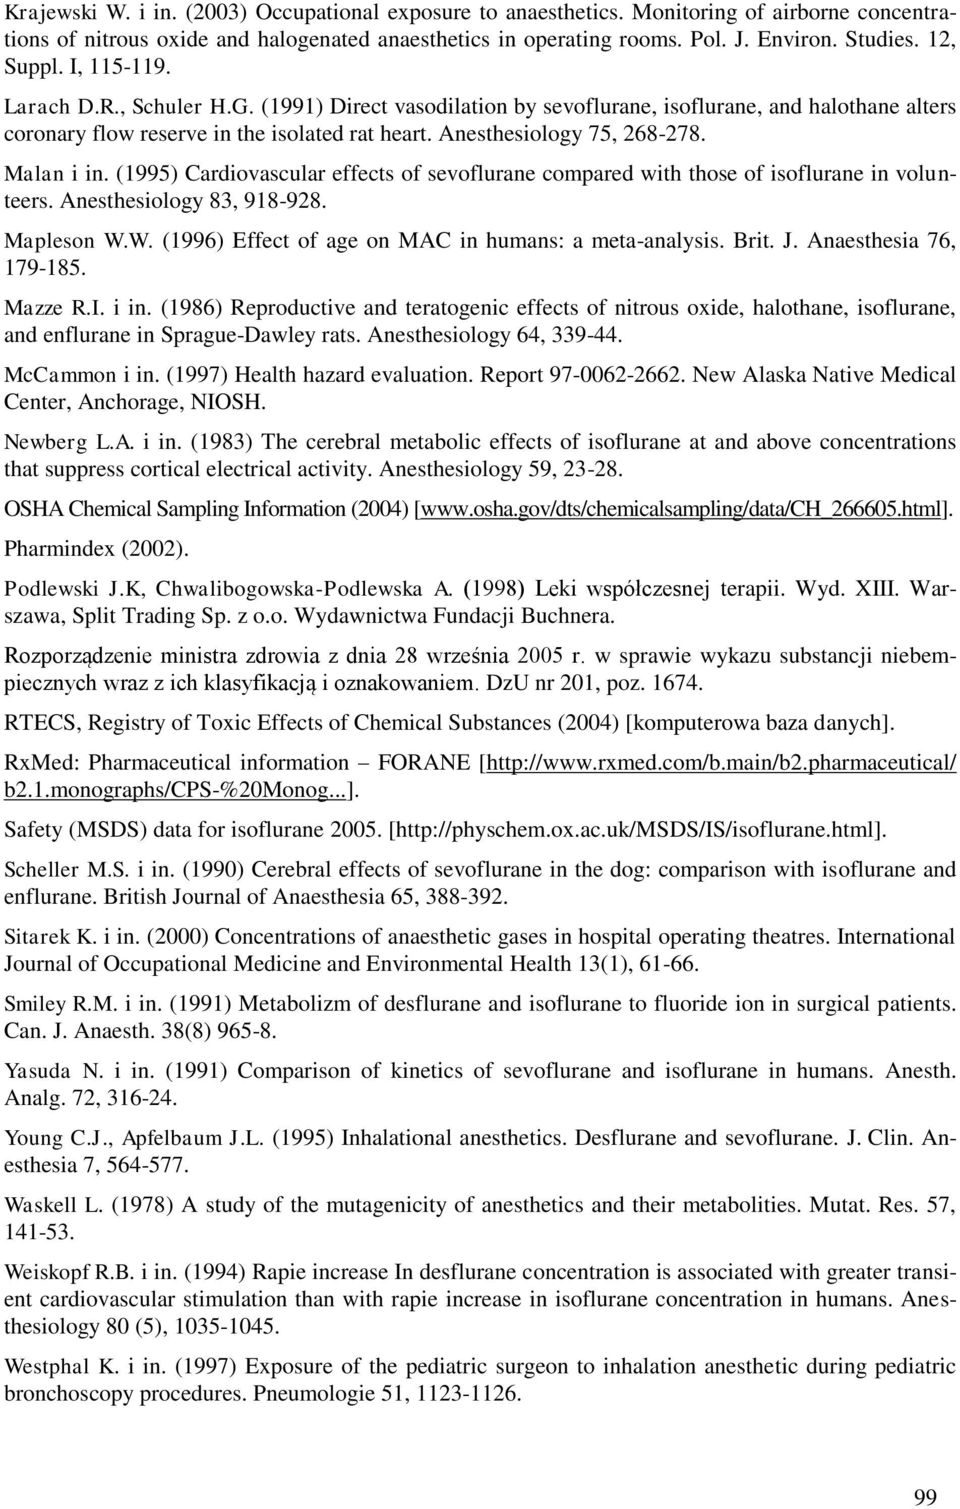 Anesthesiology 75, 268-278. Malan i in. (1995) Cardiovascular effects of sevoflurane compared with those of isoflurane in volunteers. Anesthesiology 83, 918-928. Mapleson W.